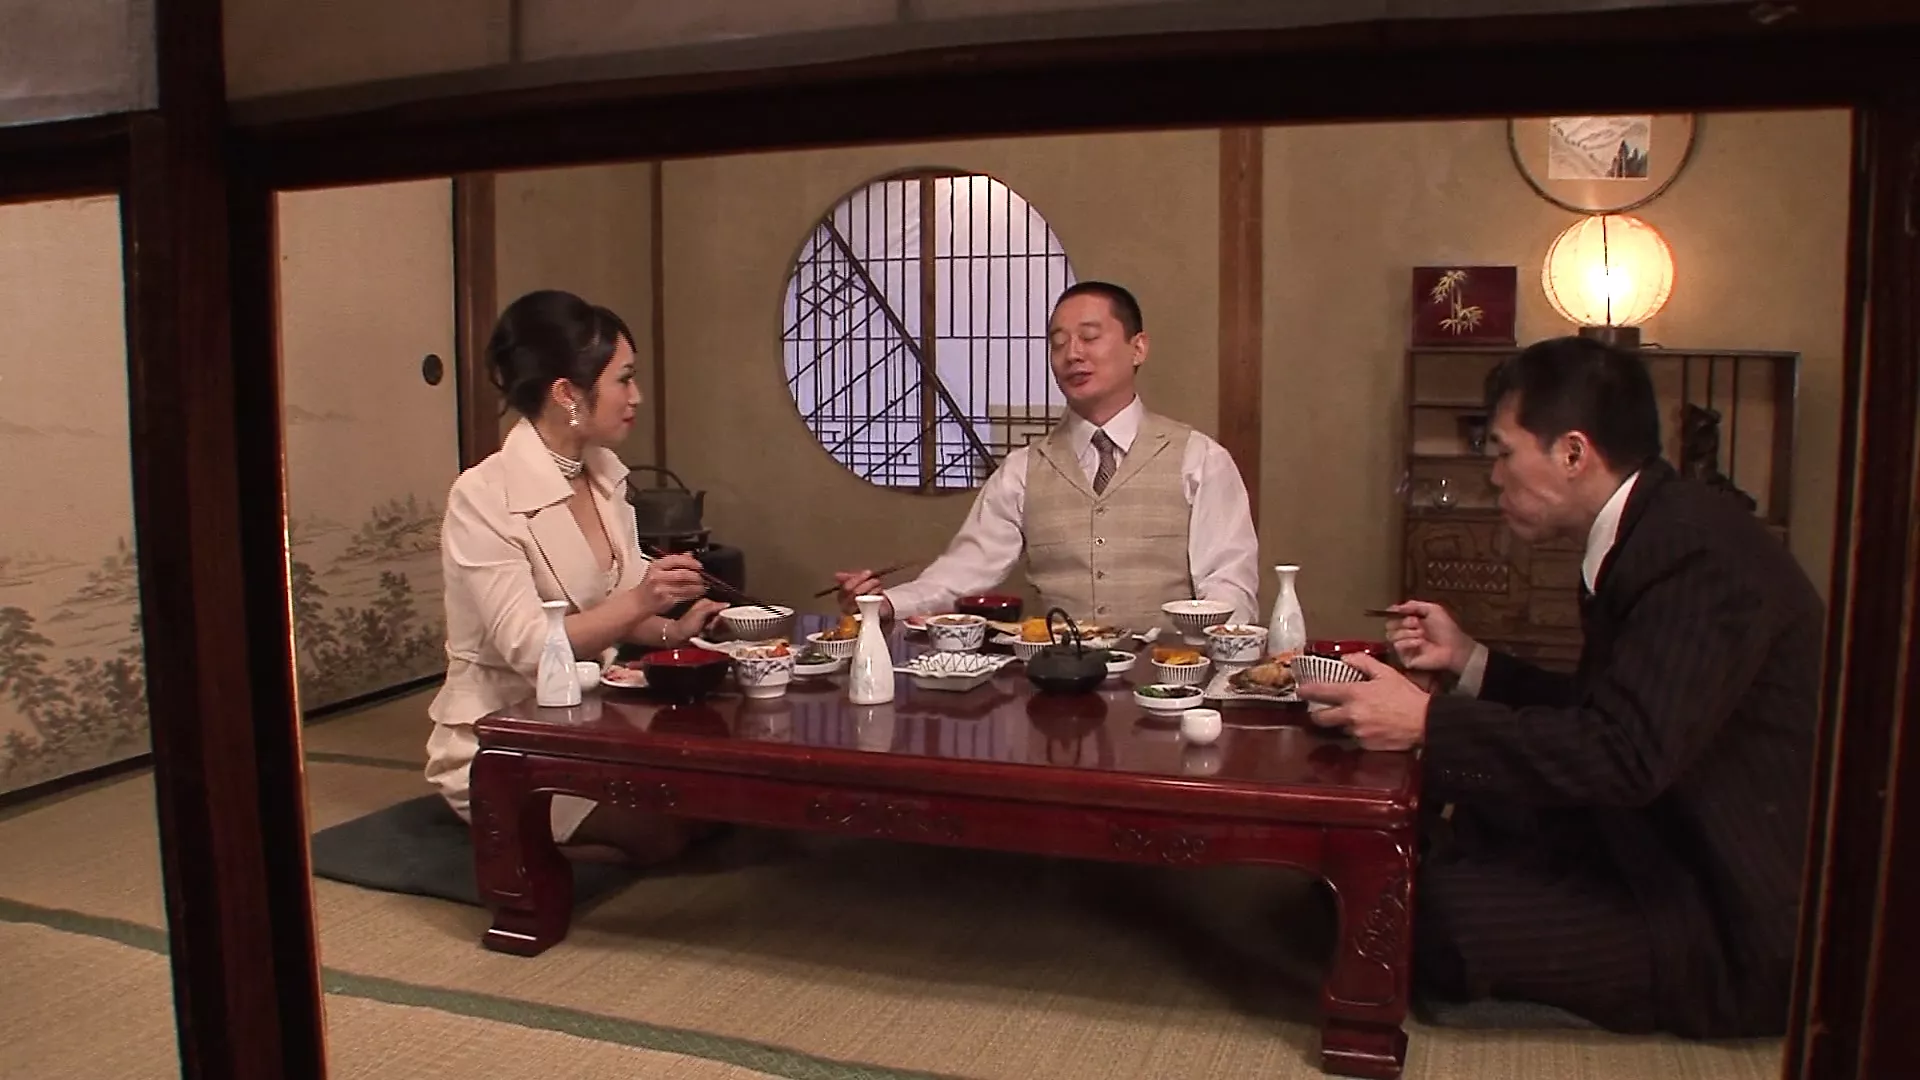 Families diner escalated! Japanese forget their manners and bang in a threesome!